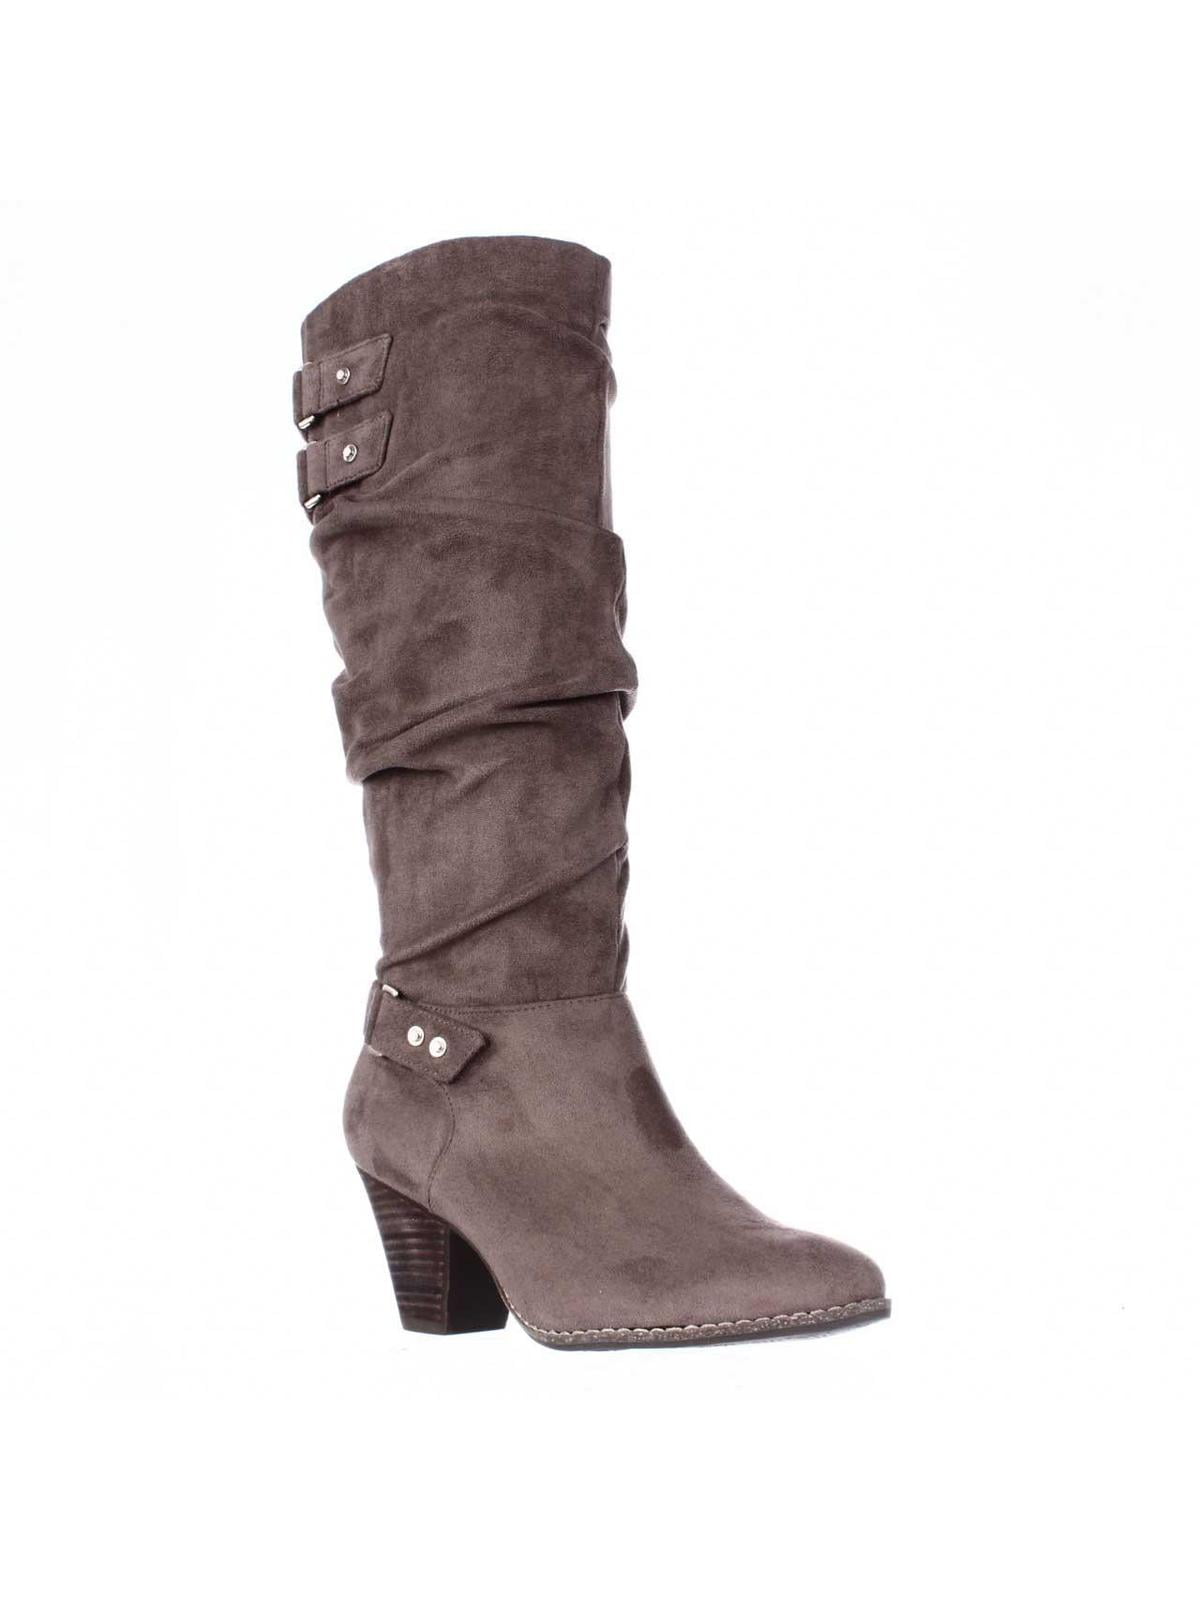 Dr. Scholl's Shoes - Womens Dr. Scholls Covet Slouch Mid-Calf Boots ...